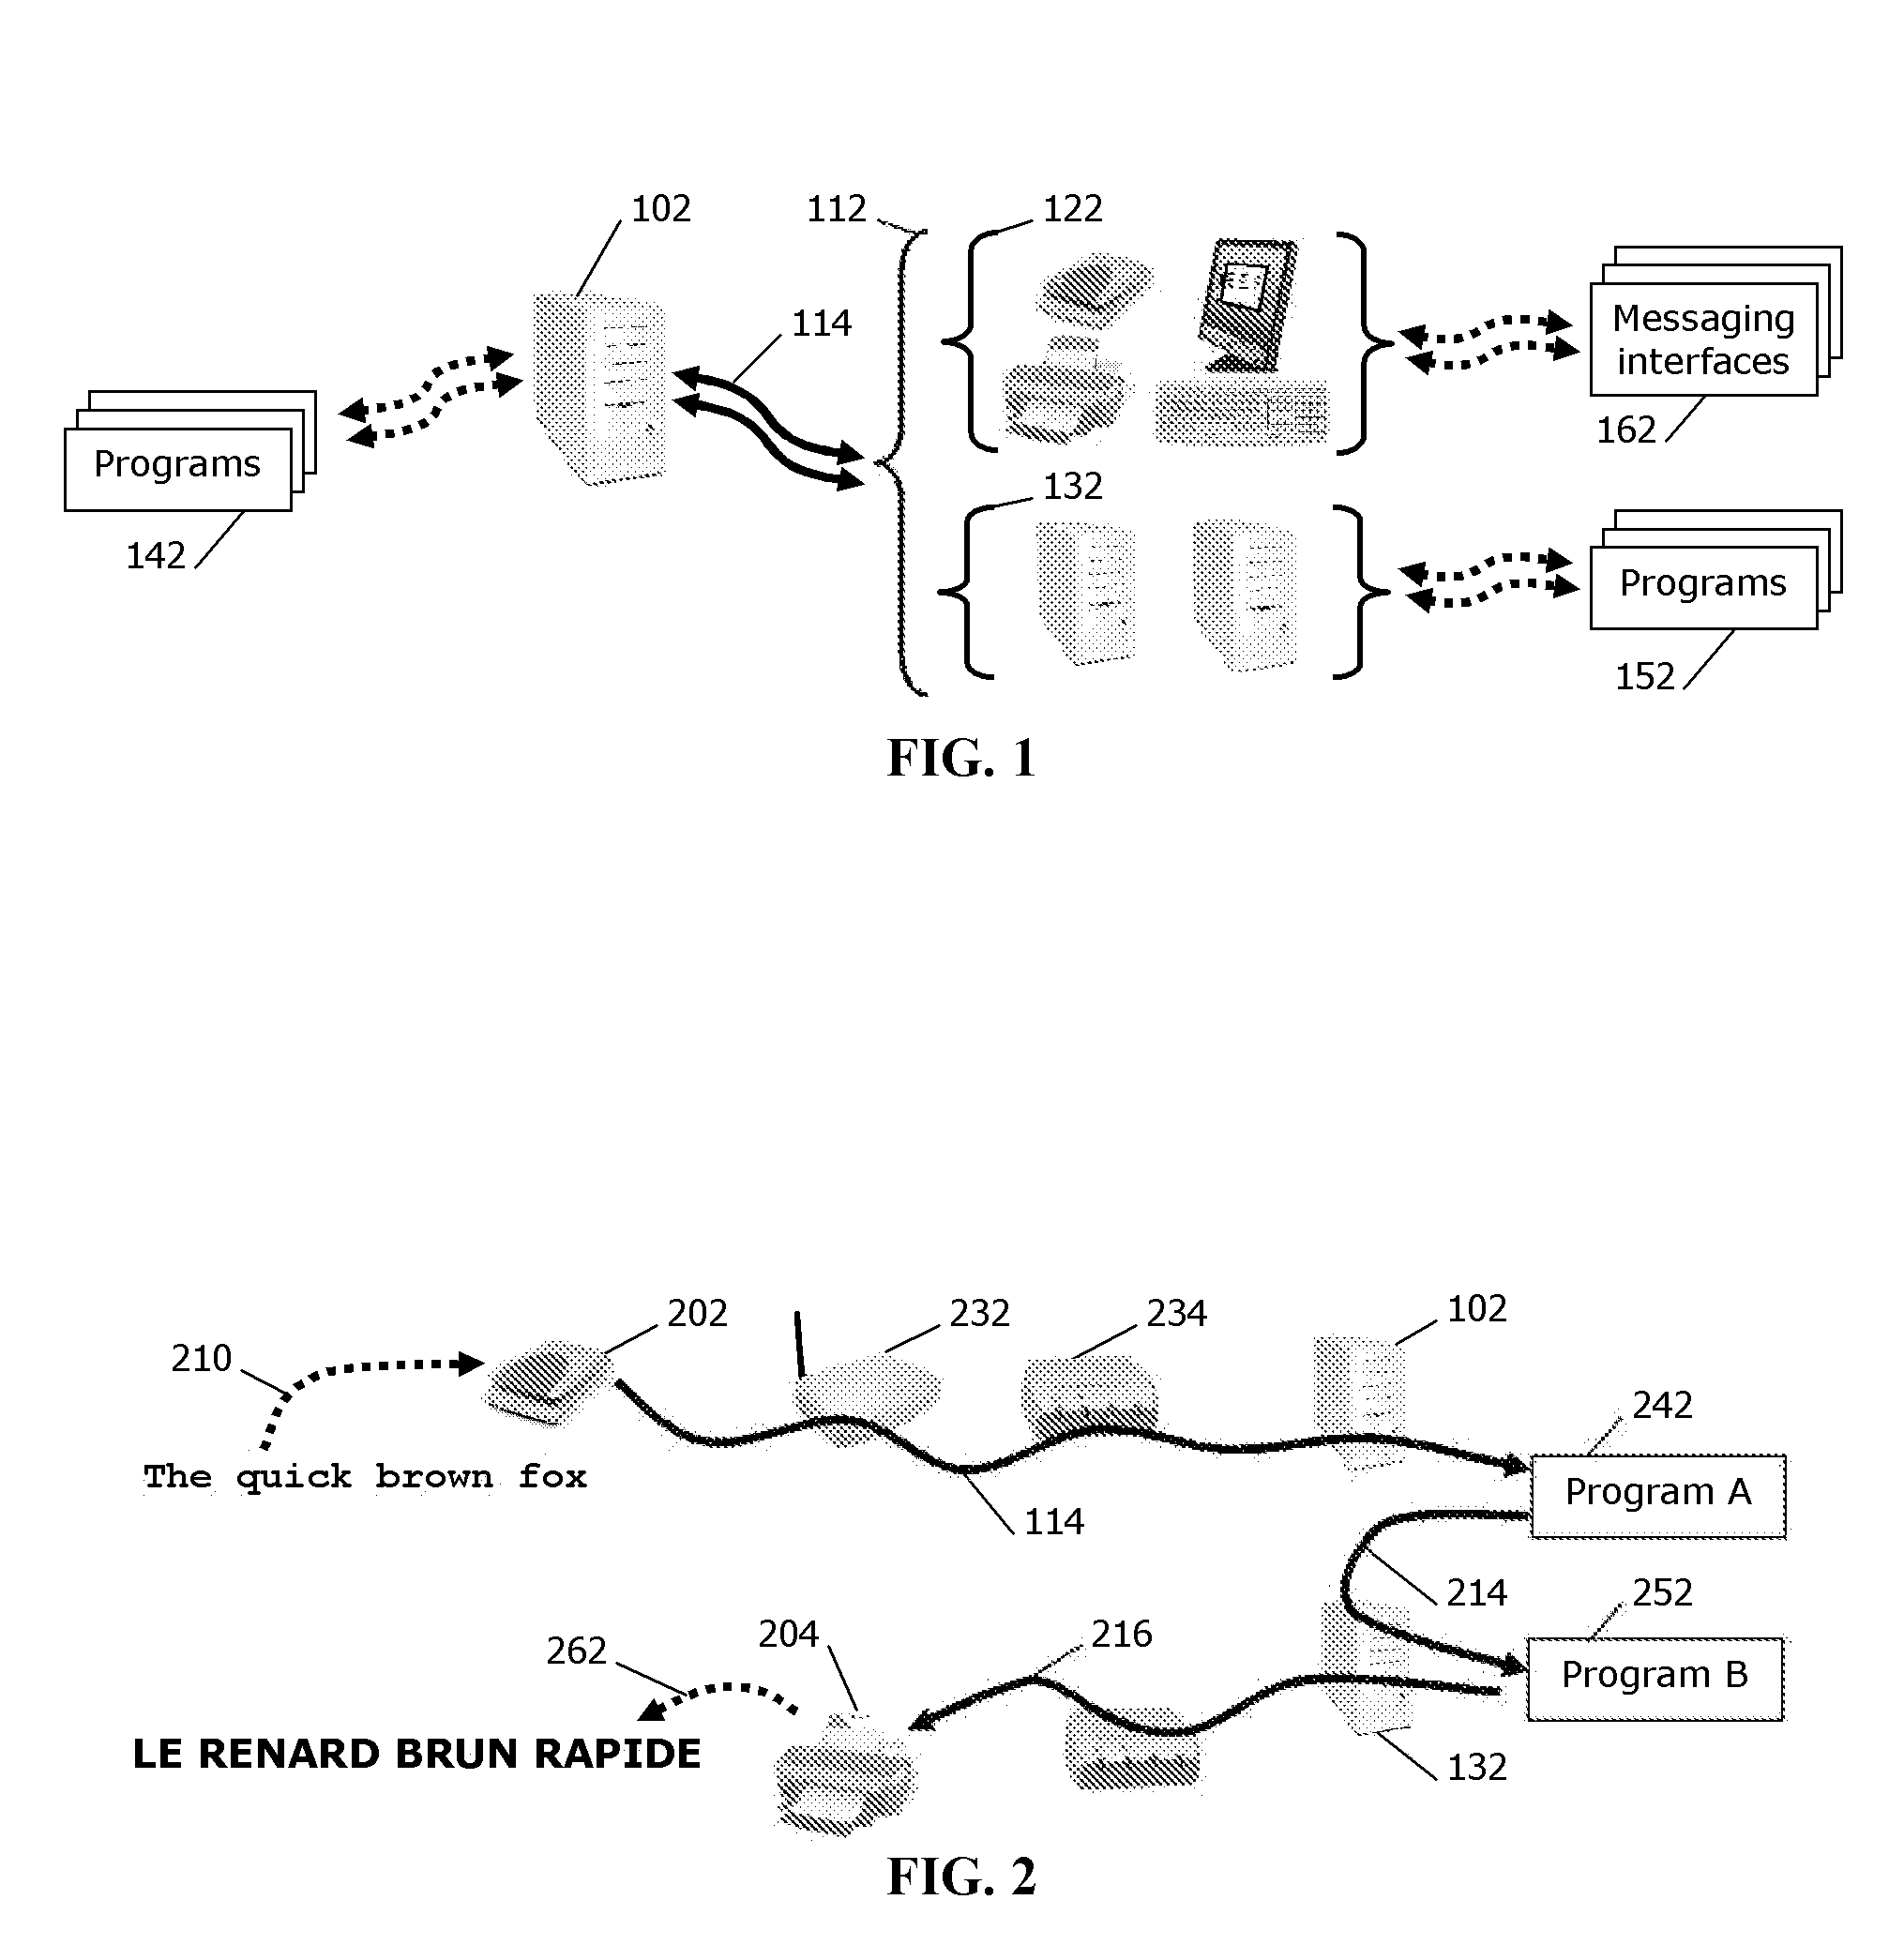 Message conduit systems with algorithmic data stream control and methods for processing thereof